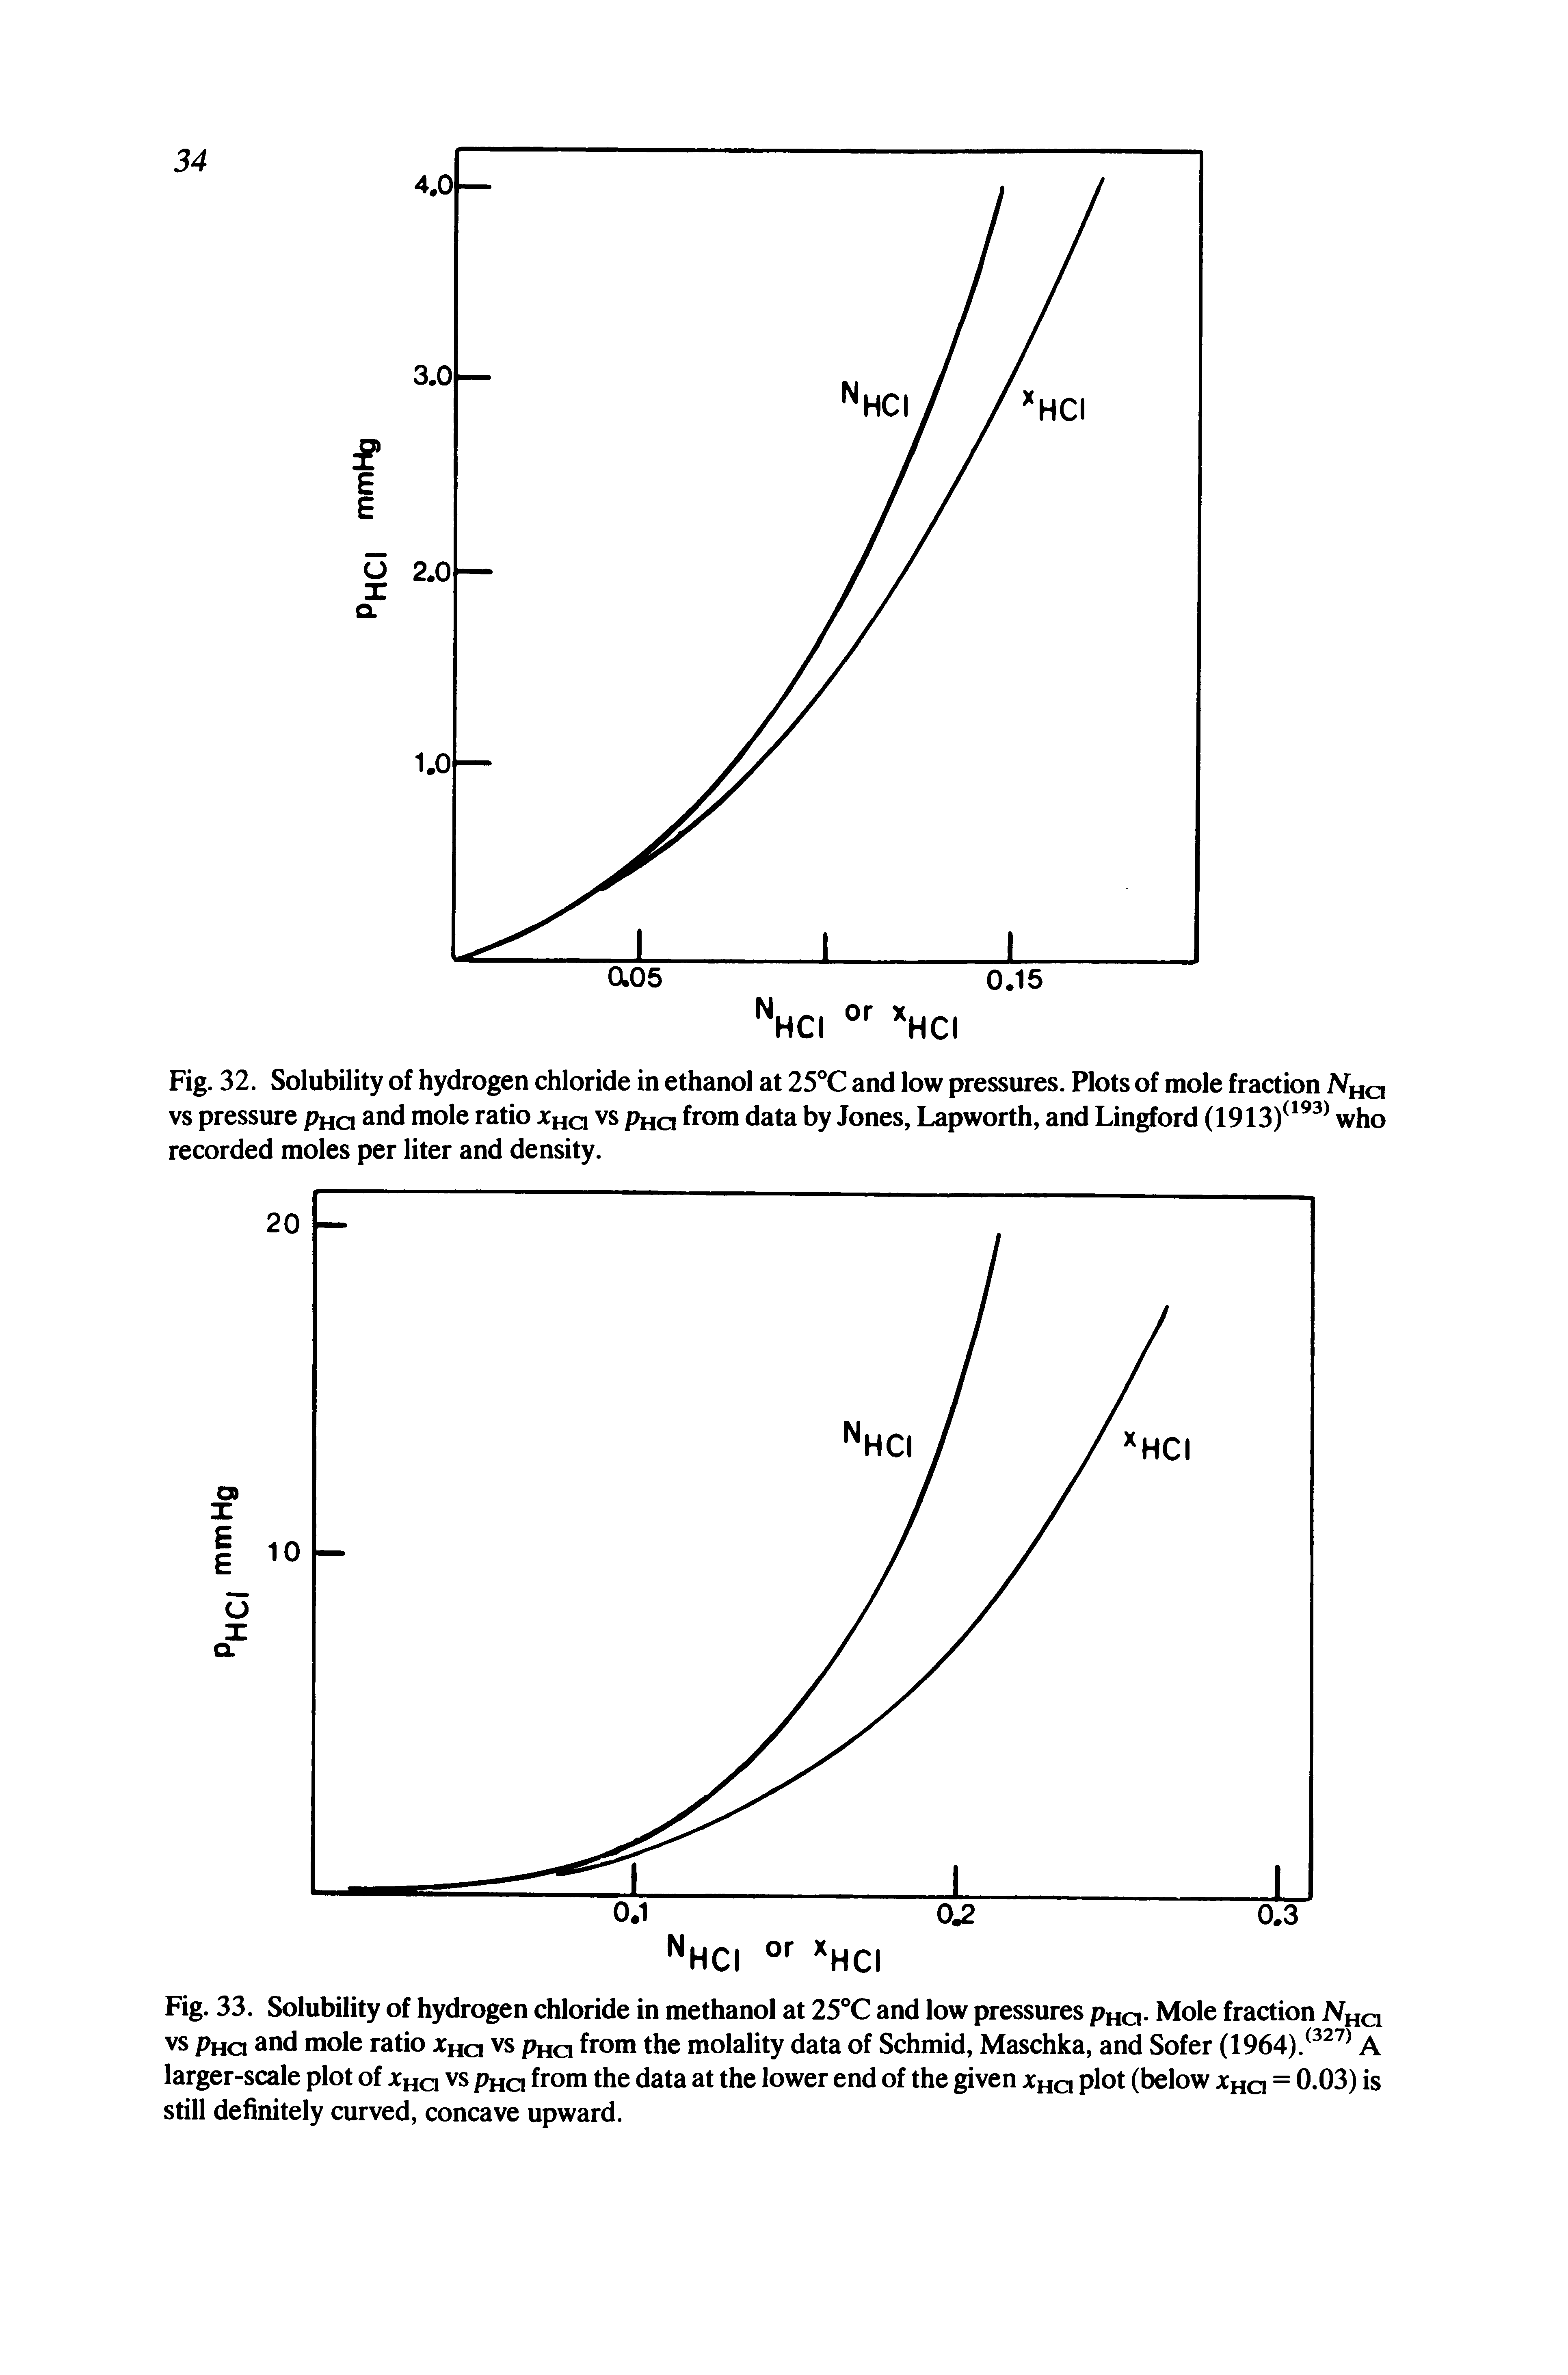 Fig. 33. Solubility of hydrogen chloride in methanol at 25 C and low pressures pna- Mole fraction Nhq vs pHo and mole ratio jchq vs pna from the molality data of Schmid, Maschka, and Sofer (1964). A larger-scale plot of jcho vs Pho from the data at the lower end of the given Xho plot (below Xna = 0.03) is still definitely curved, concave upward.